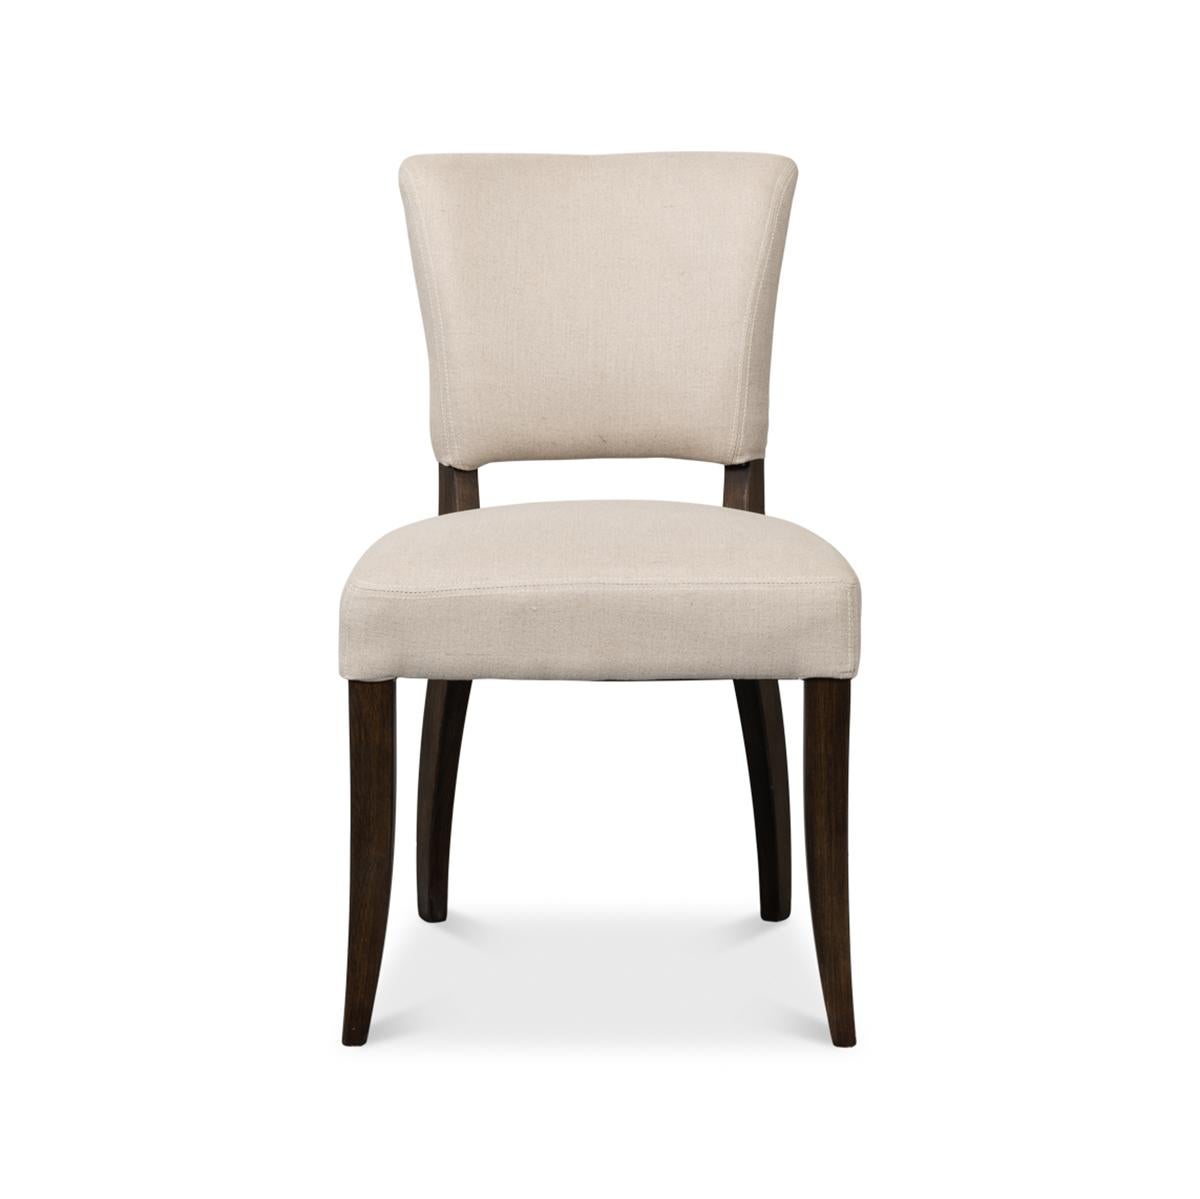 Classic dining side chair, with graceful lines, a full curved back to accentuate comfort, and a linen fabric that speaks to soft tactile luxury. With brass nailhead details on tapered legs.

Dimensions: 20